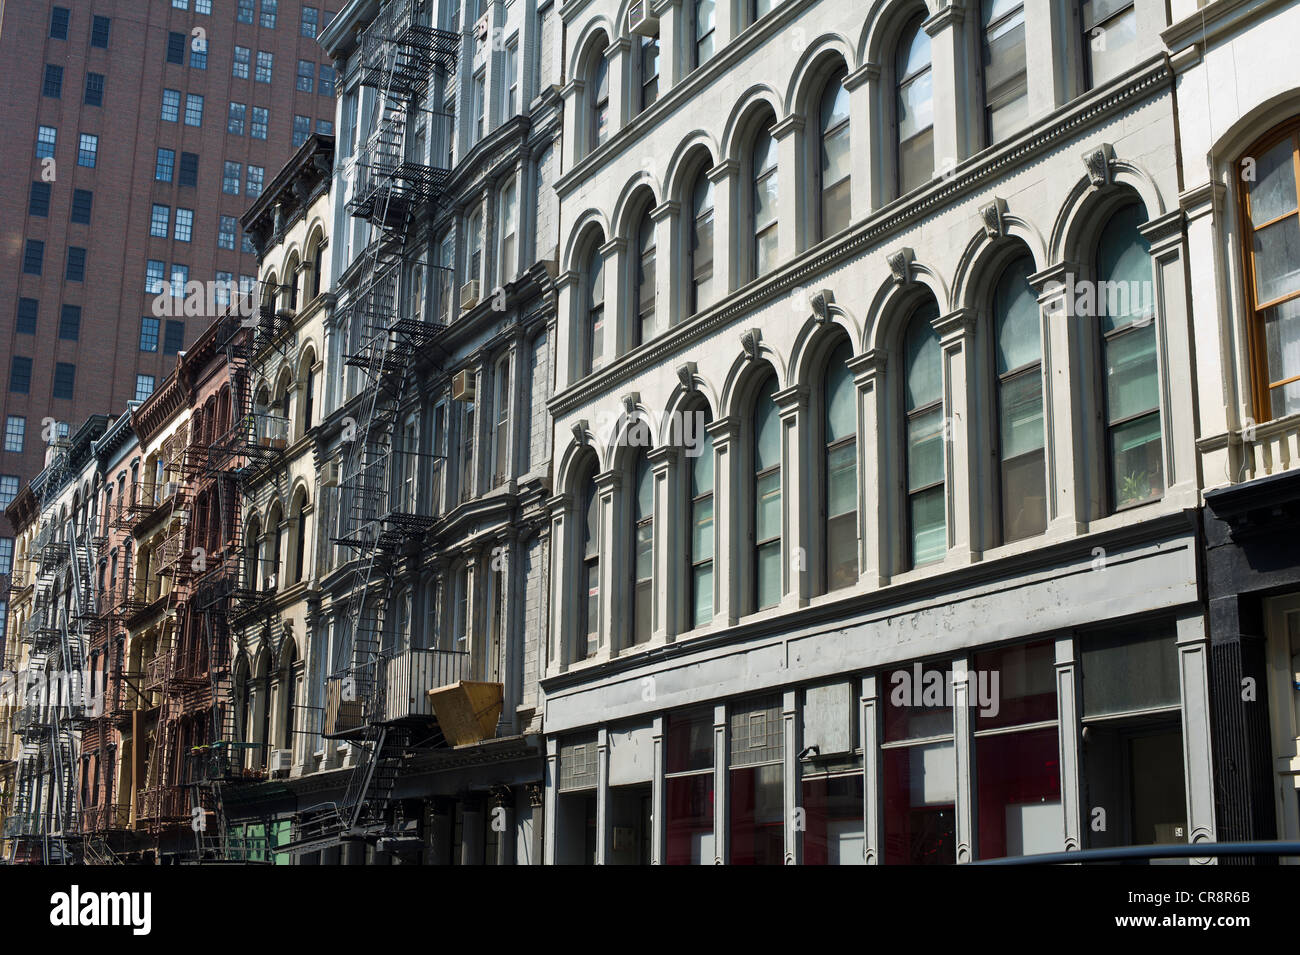 Cast iron and brick facade buildings in the New York neighborhood of Tribeca Stock Photo